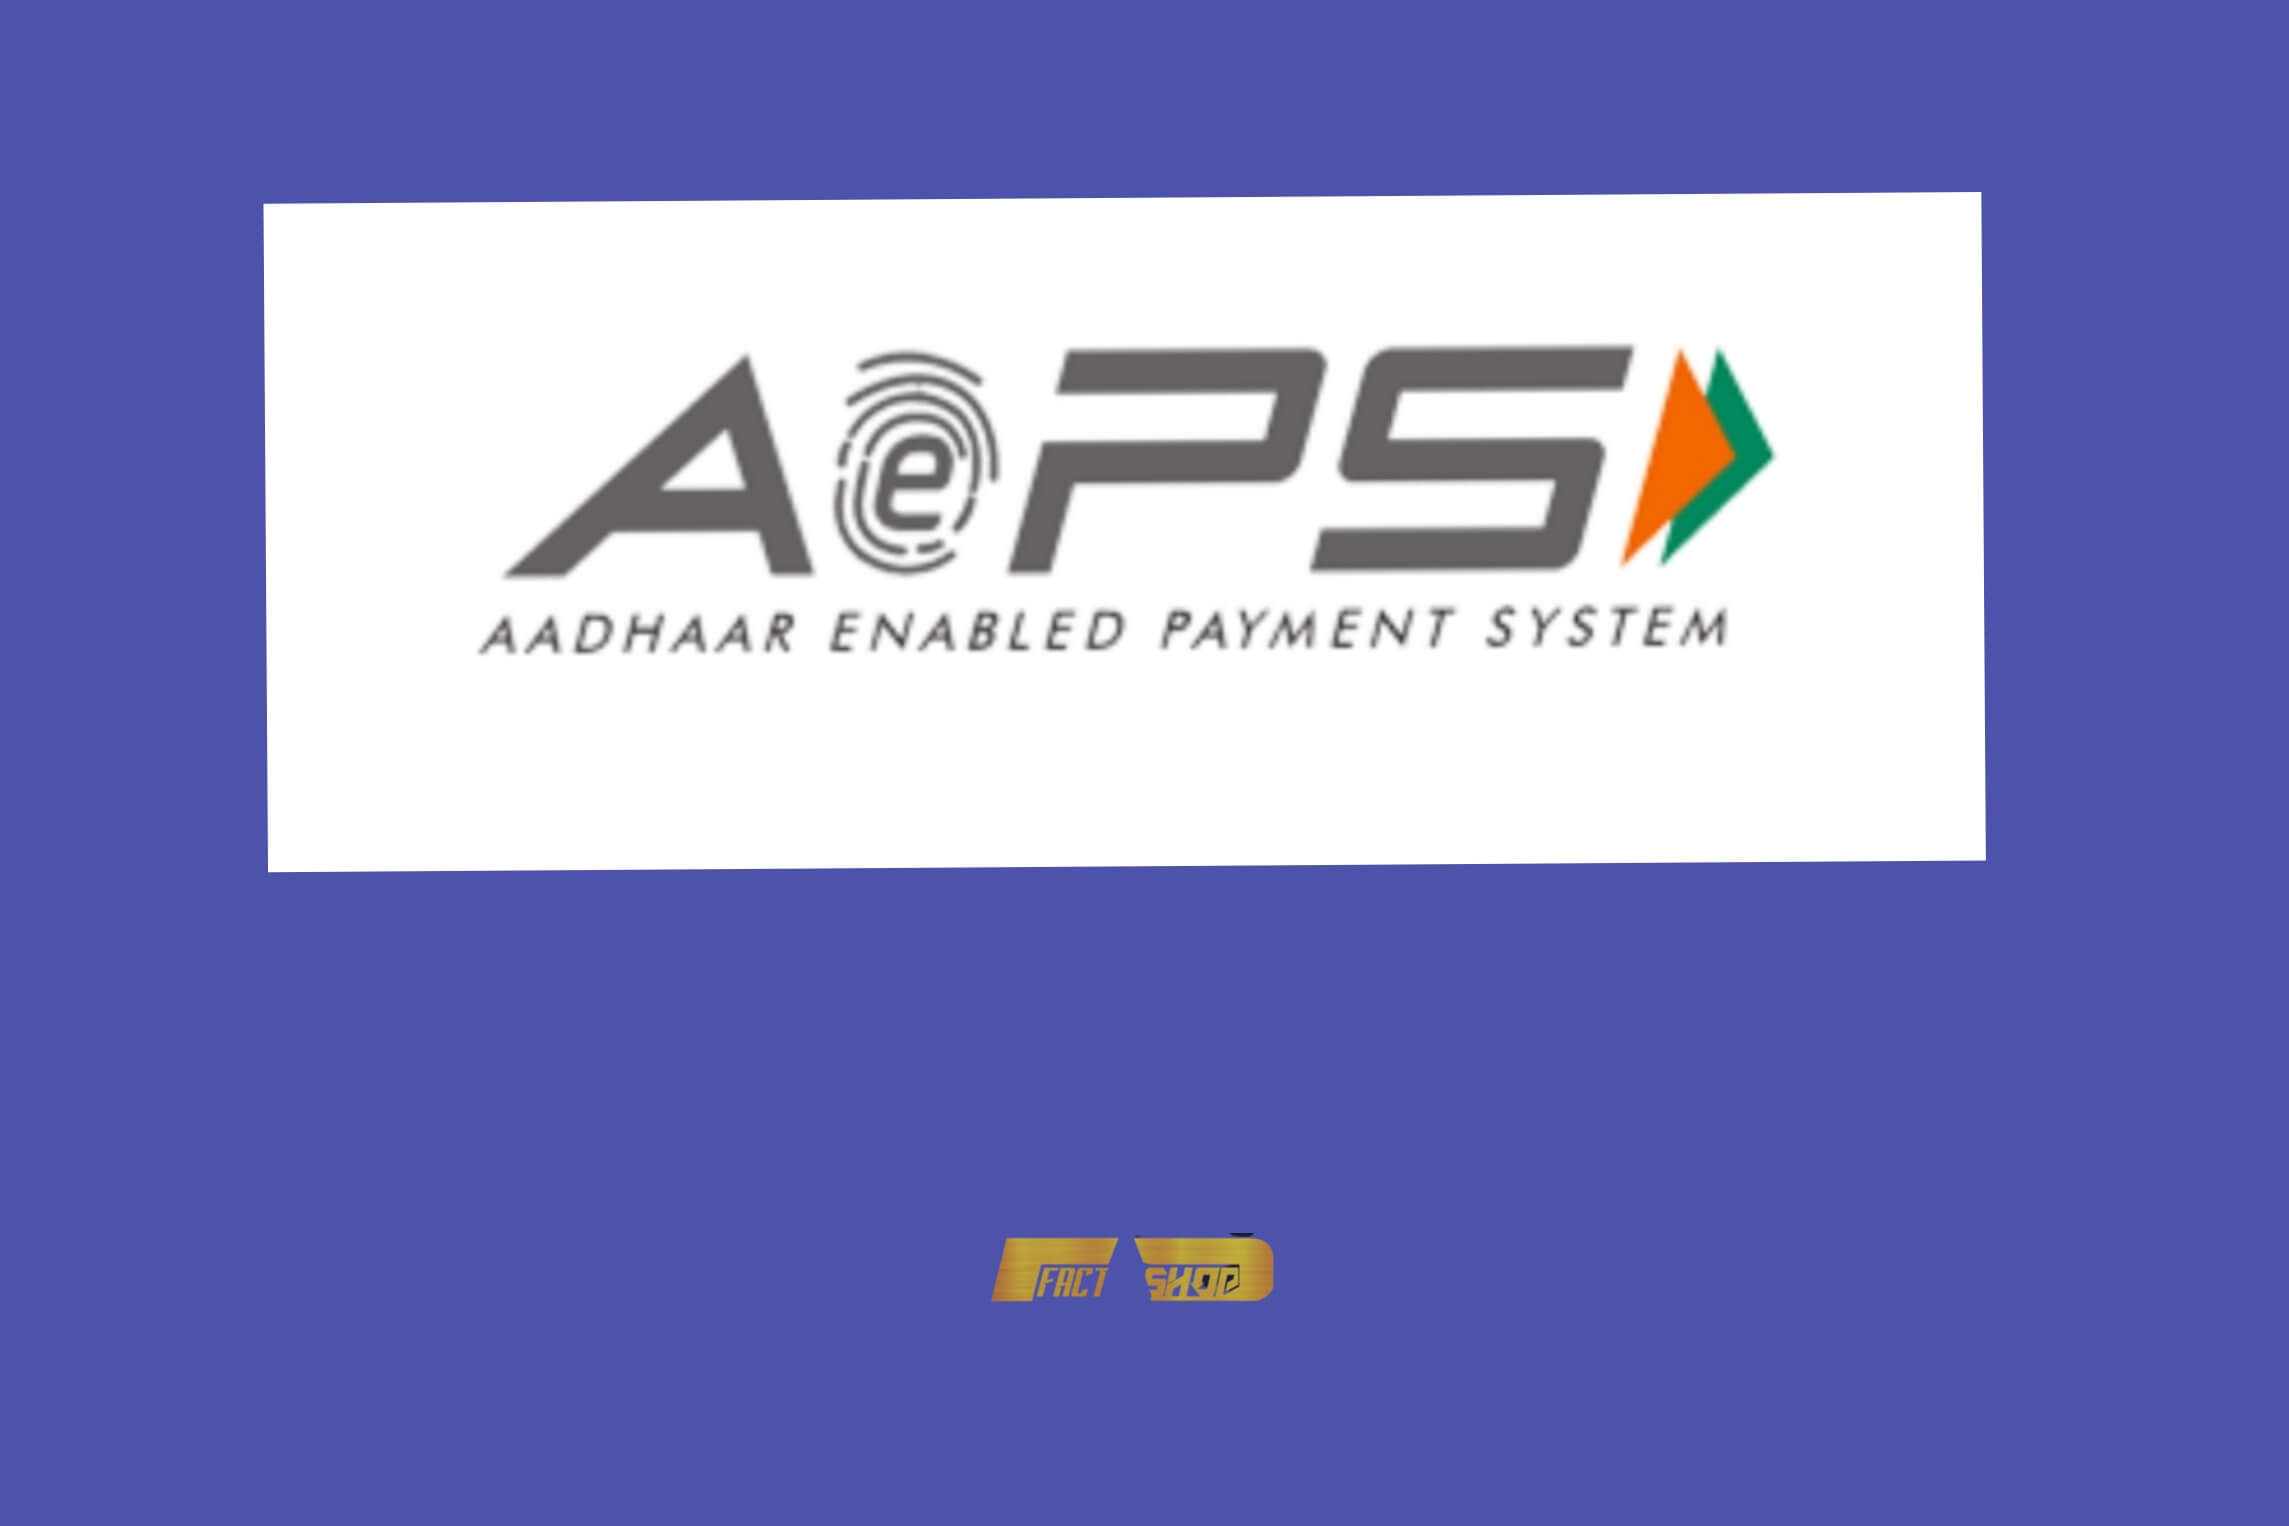 Aadhaar Enabled Payment System APES in Hindi